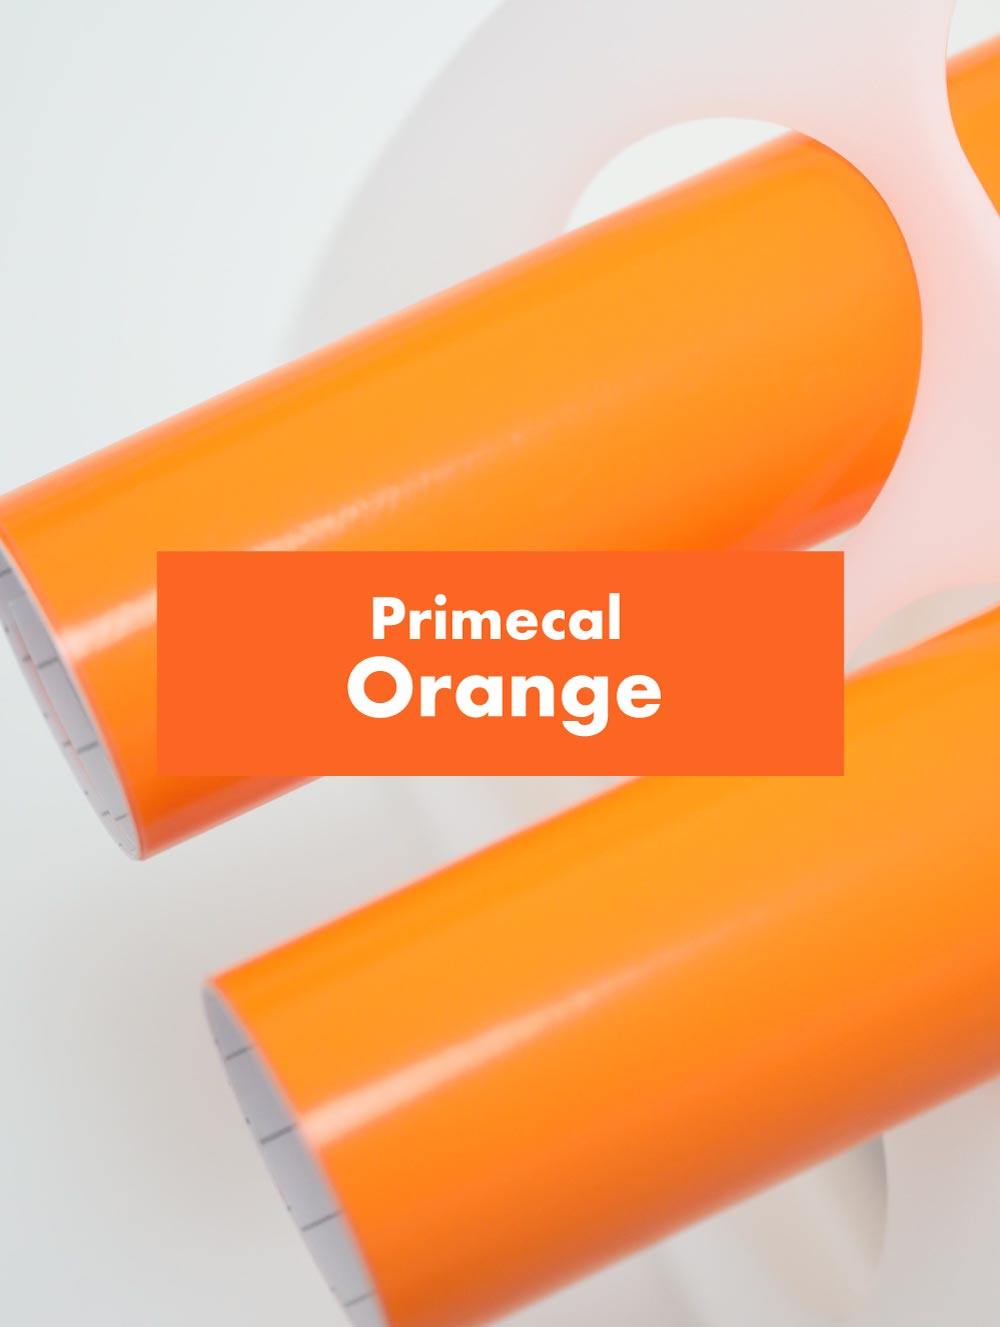 Primecal Xcal Glossy Adhesive Vinyl Stickers 12x12